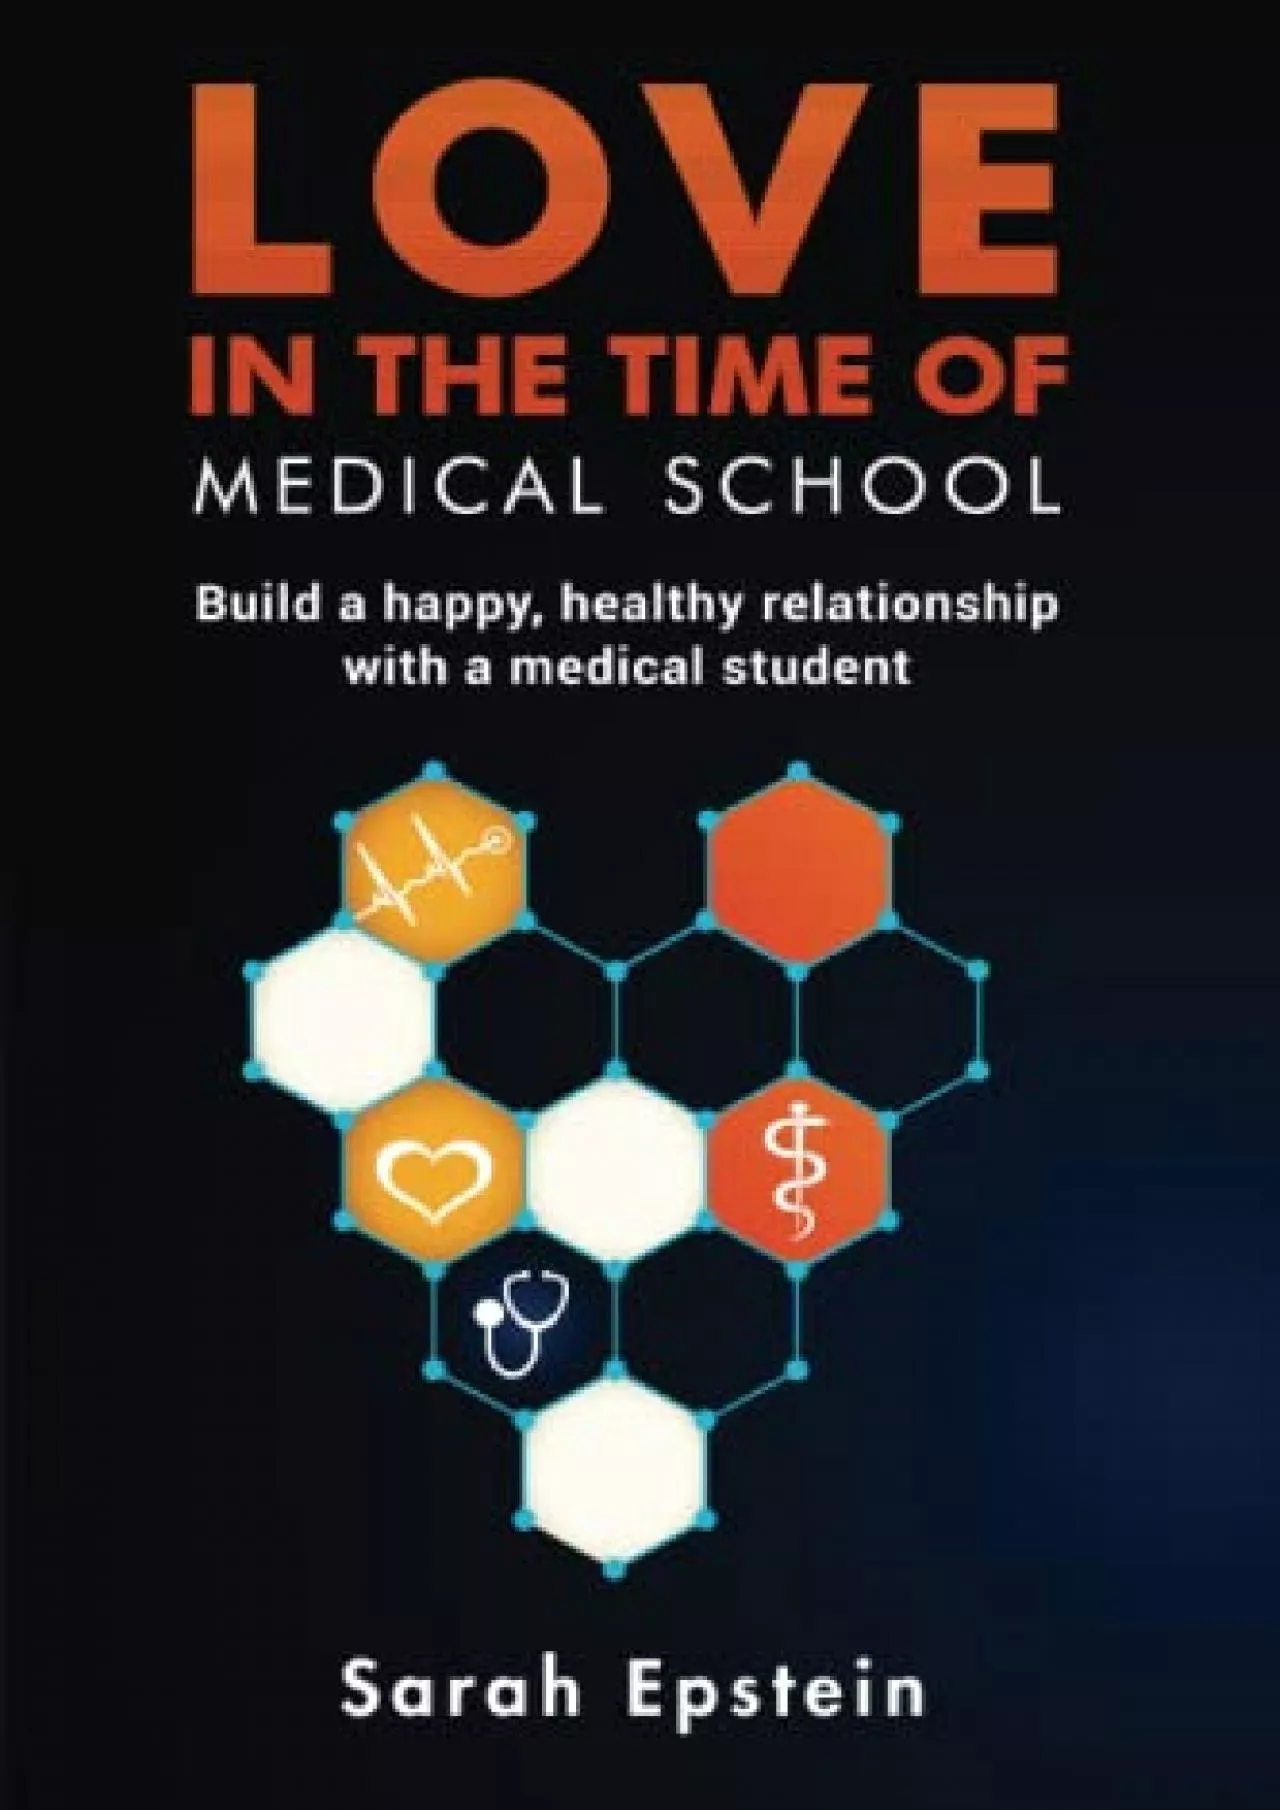 (BOOK)-Love in the time of medical school: Build a happy, healthy relationship with a